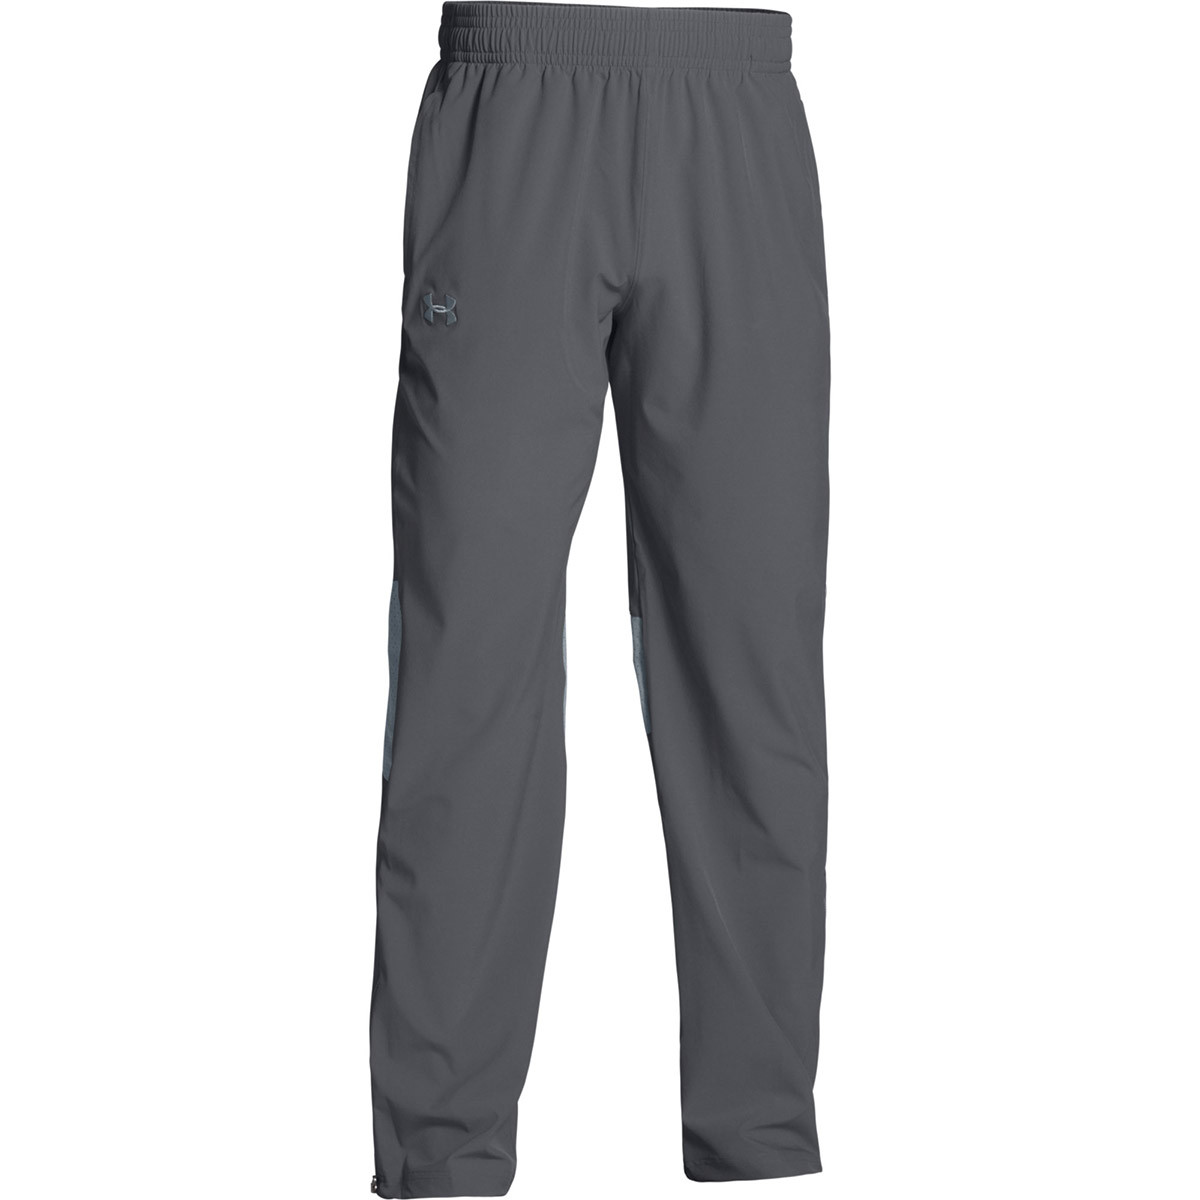 ORL Under Armour Men's Squad Woven Warm-Up Pant - Graphite 